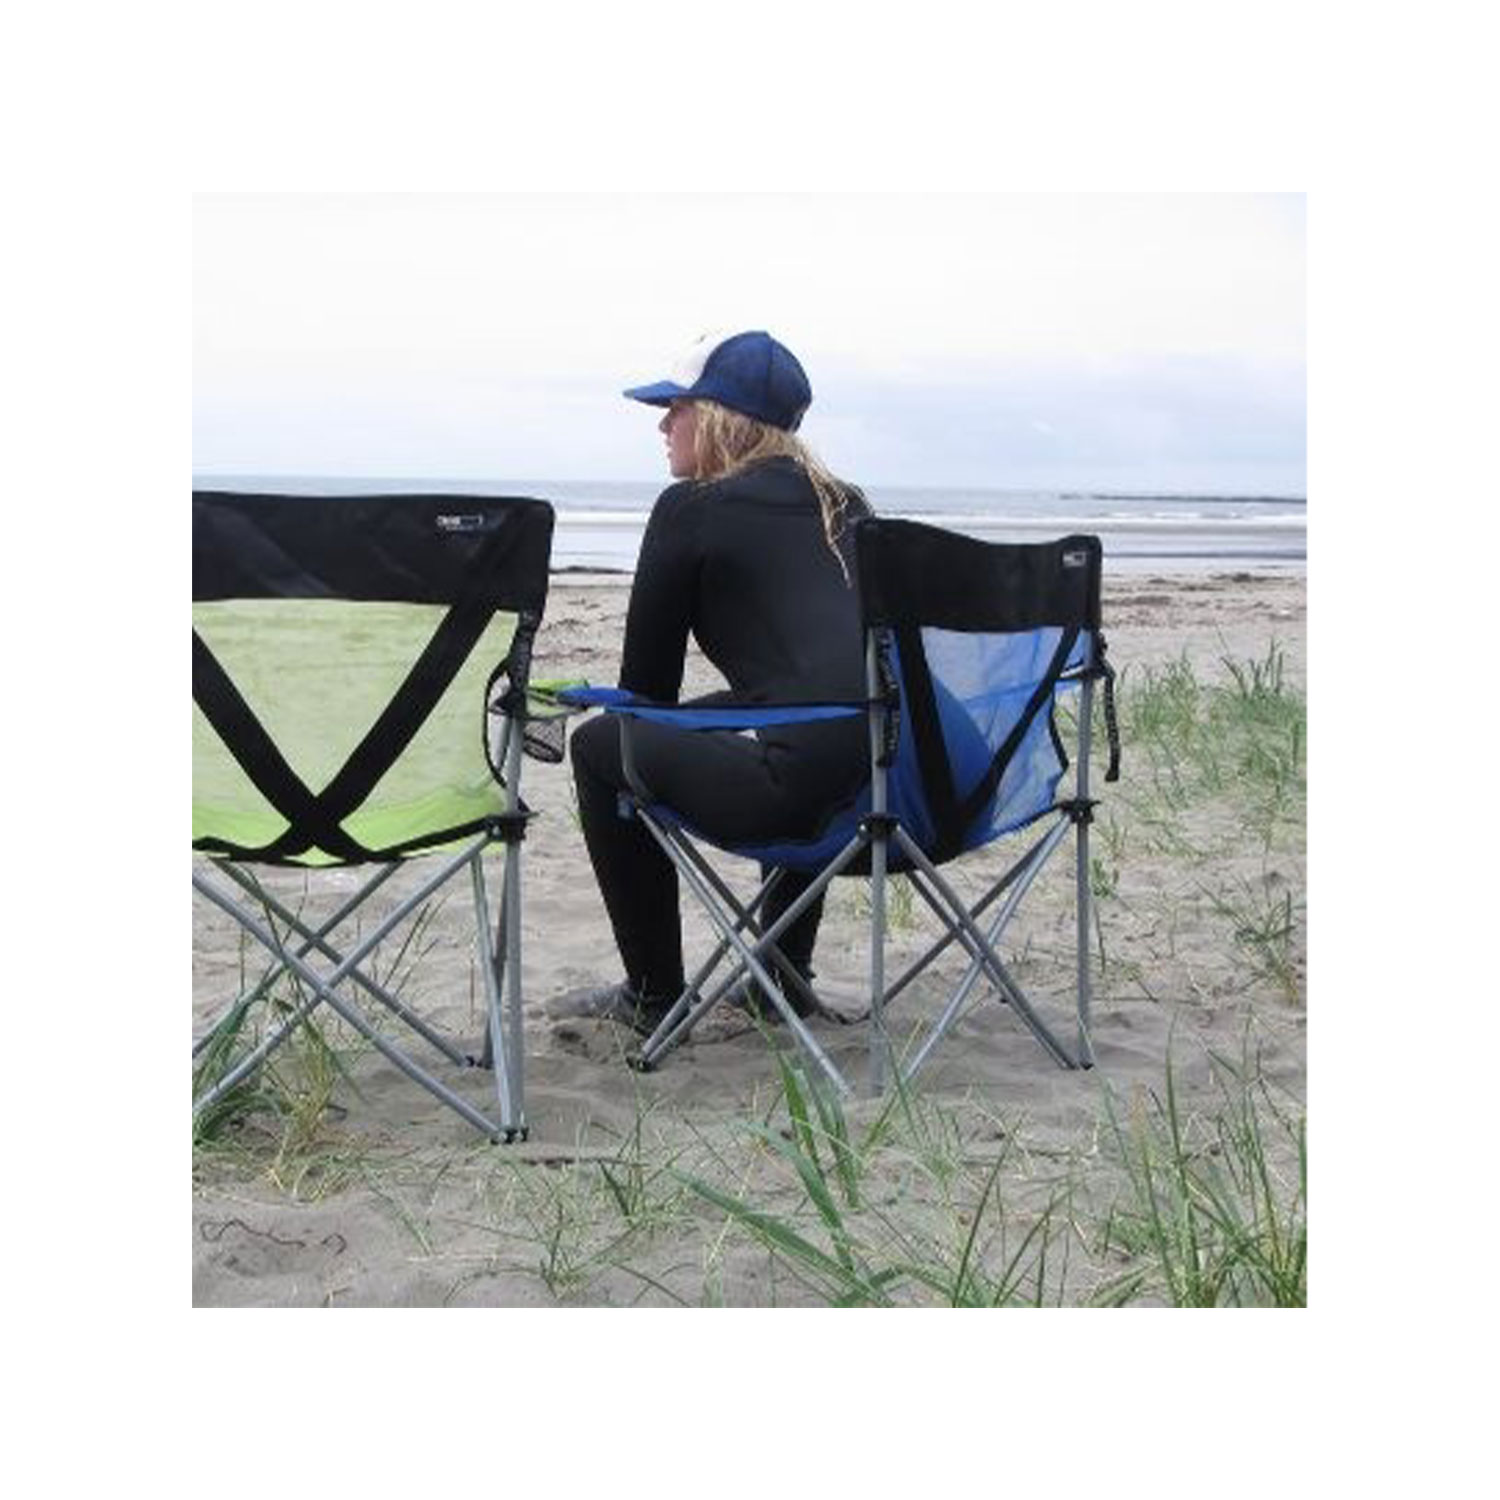 TravelChair Teddy Steel Camping Chair - Blue - image 2 of 6